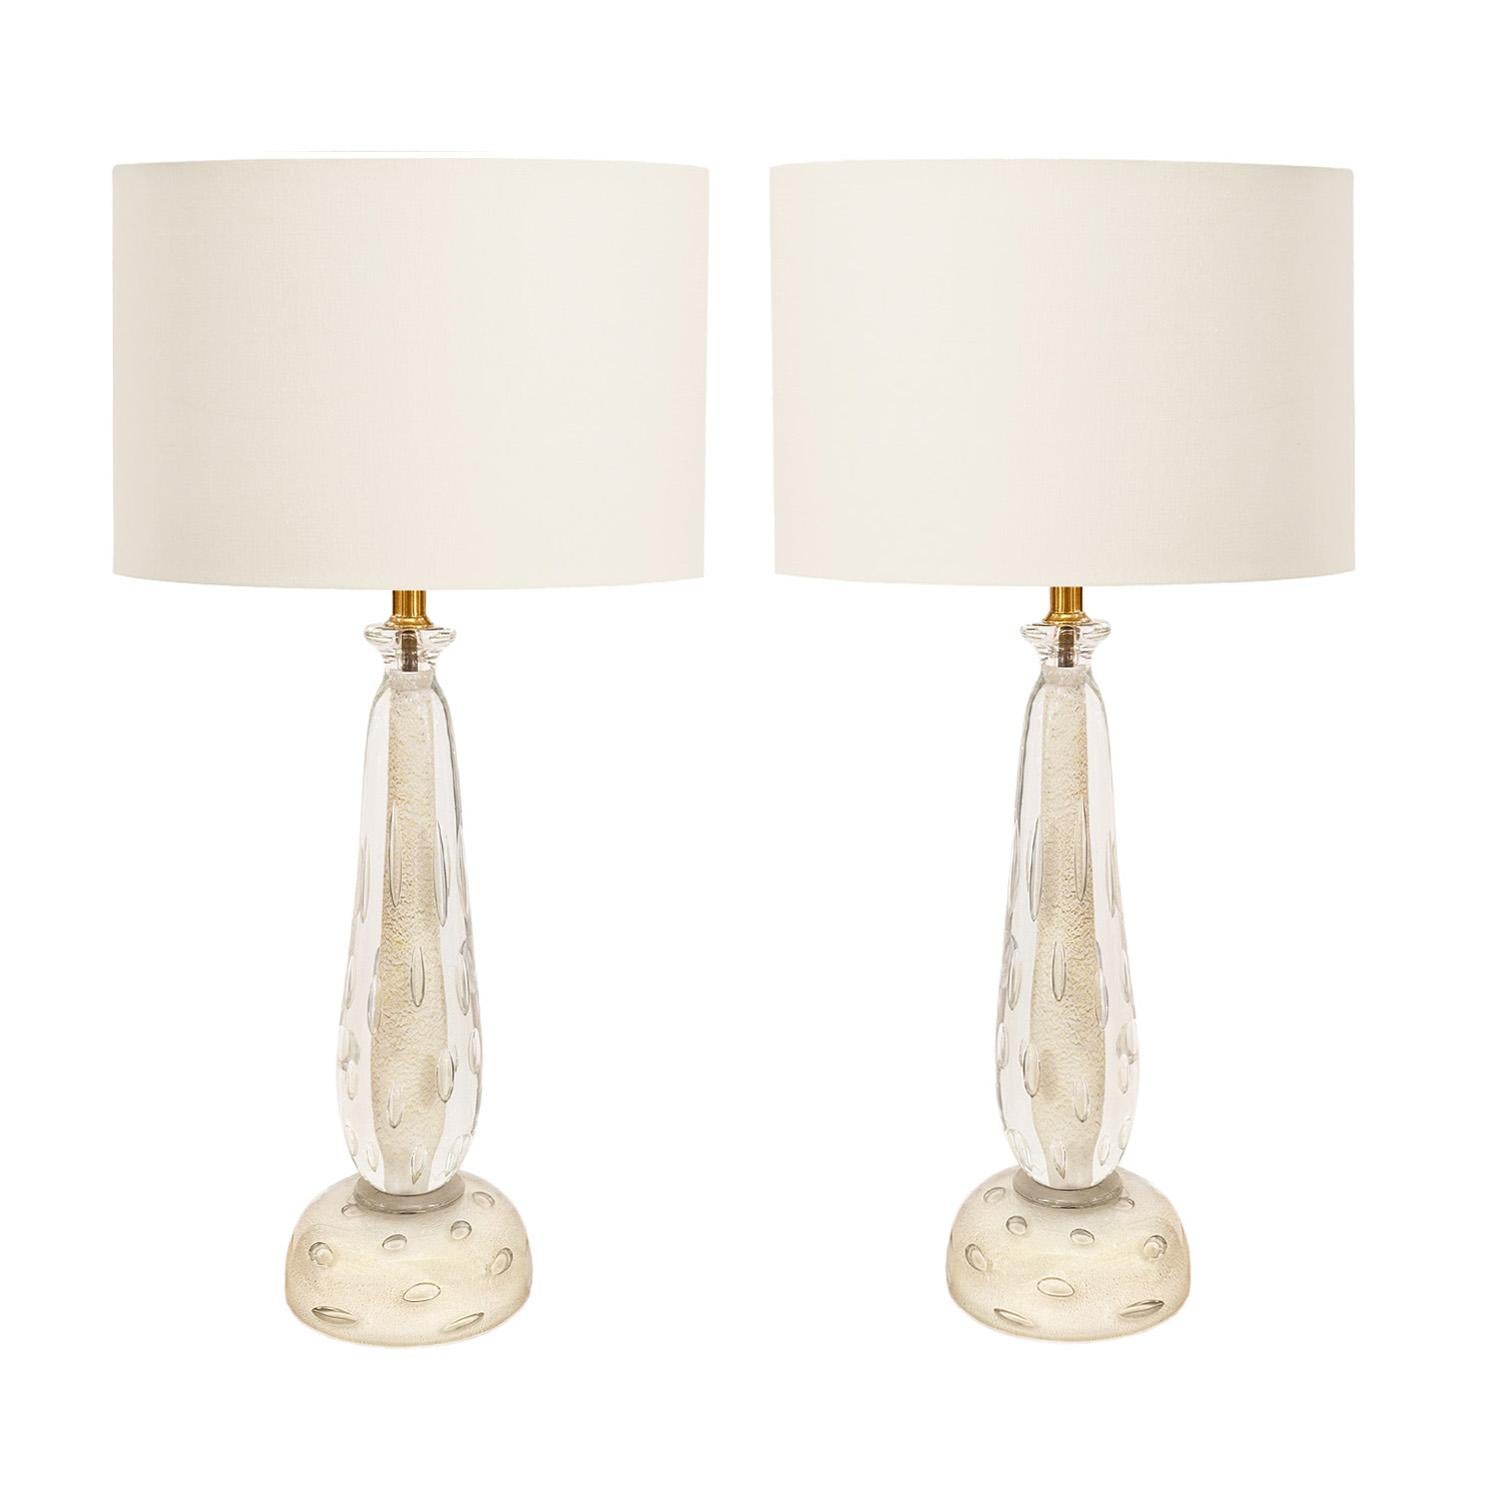 Exceptional pair of 1950's Murano sommerso white and clear glass table lamps containing exaggerated bullicante with avventurina and hardware finished in golden brass. Although not attributed to a particular glass house or artist, this beautifully